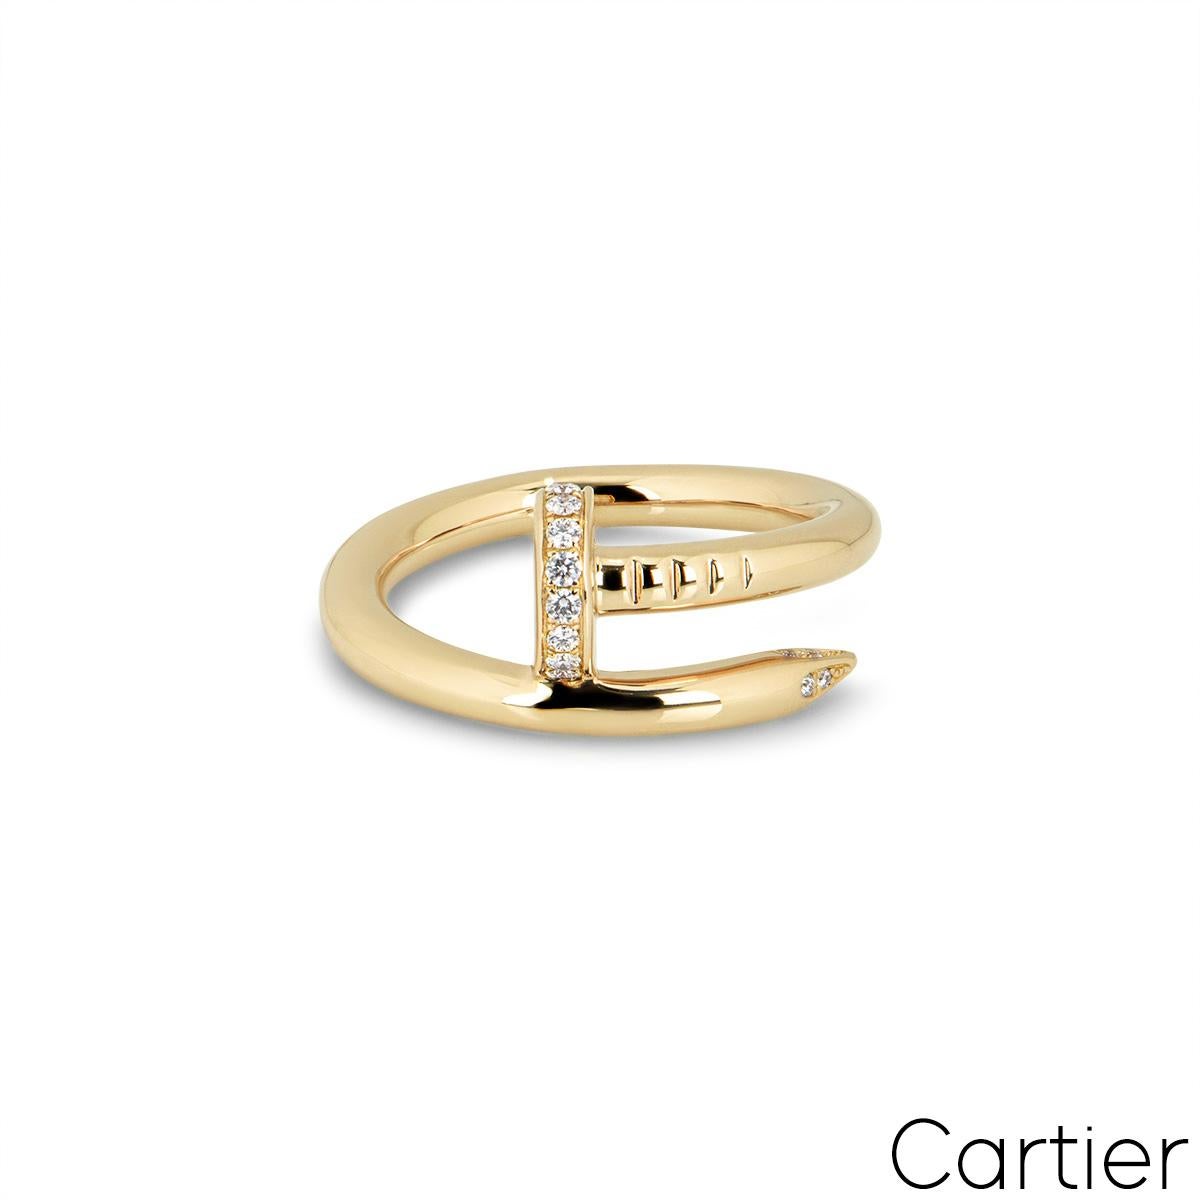 Round Cut Cartier Yellow Gold Diamond Juste Un Clou Ring Size 48 B4216900 For Sale